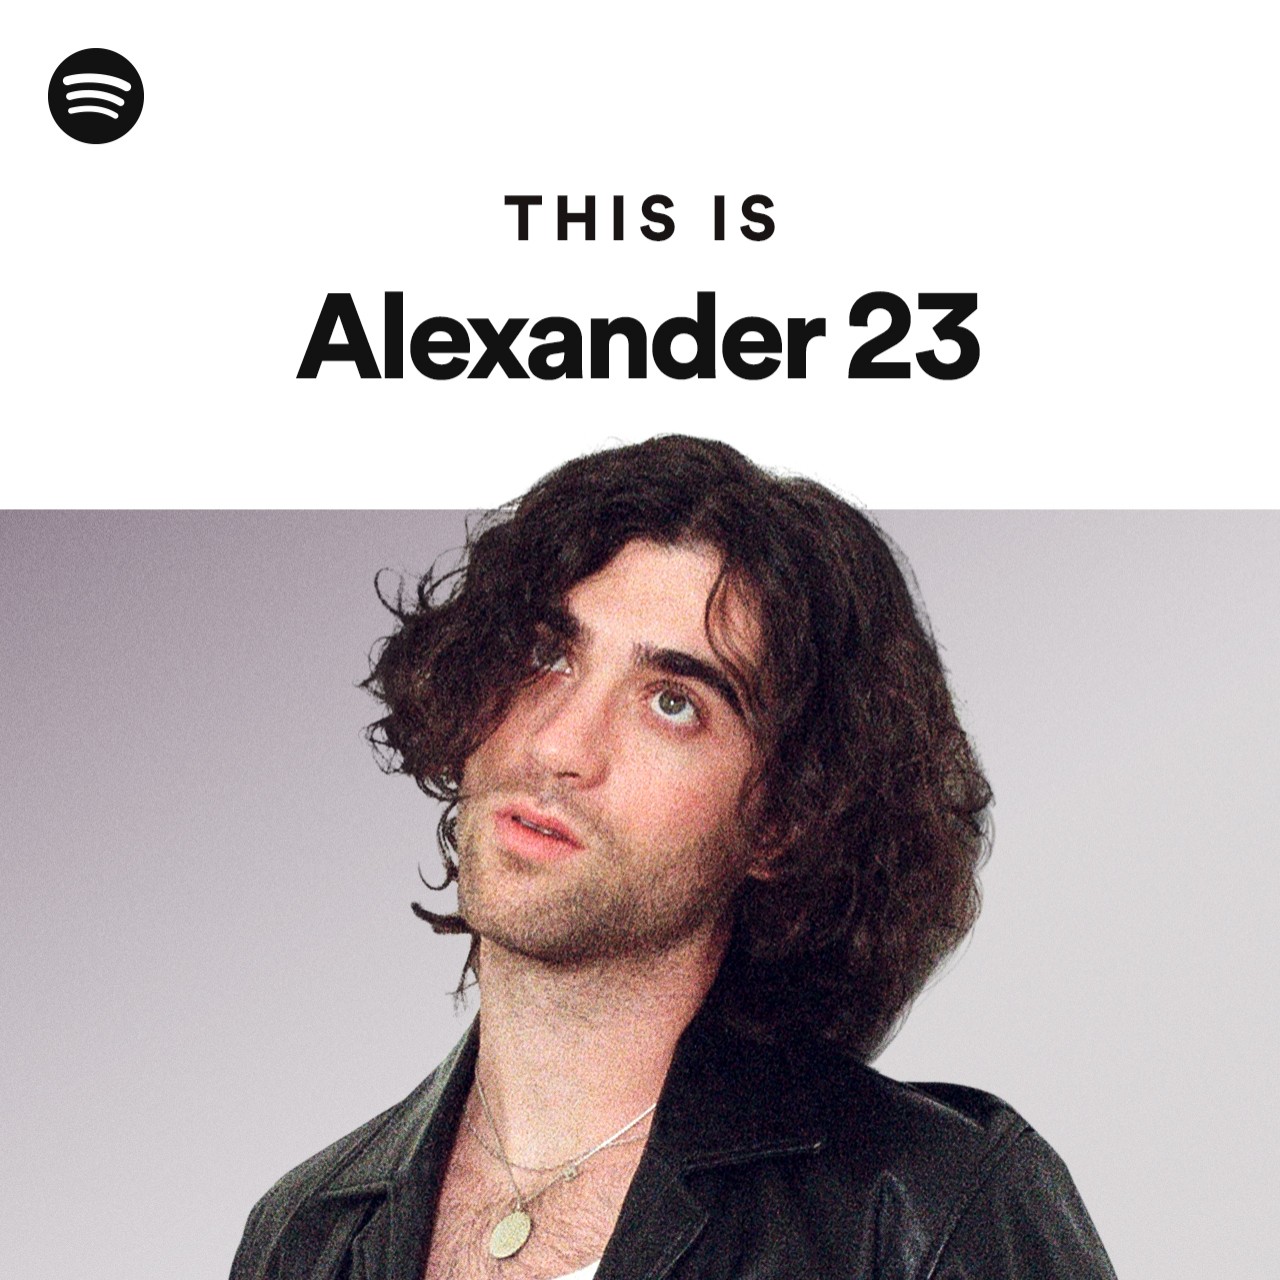 This Is Alexander 23 Spotify Playlist